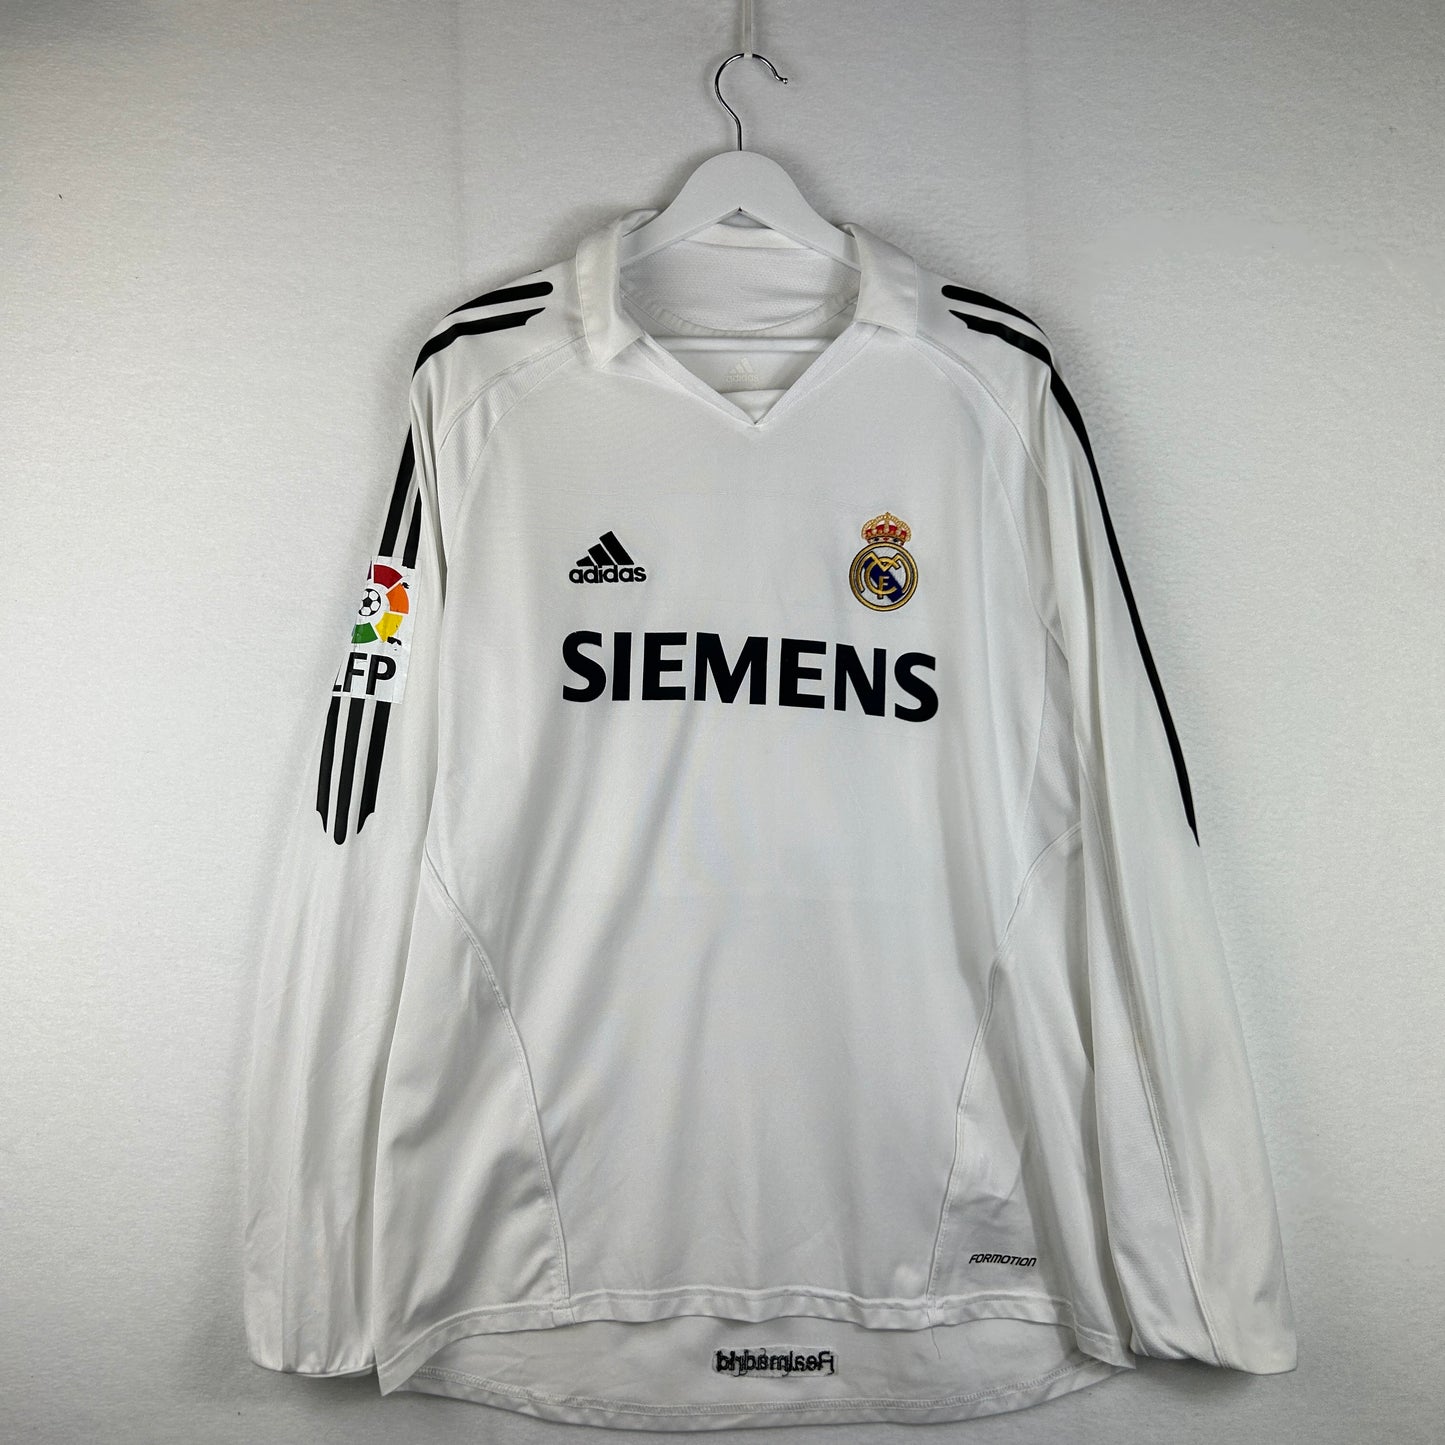 Real Madrid 2005/2006 Player Issue Home Shirt - Beckham 7